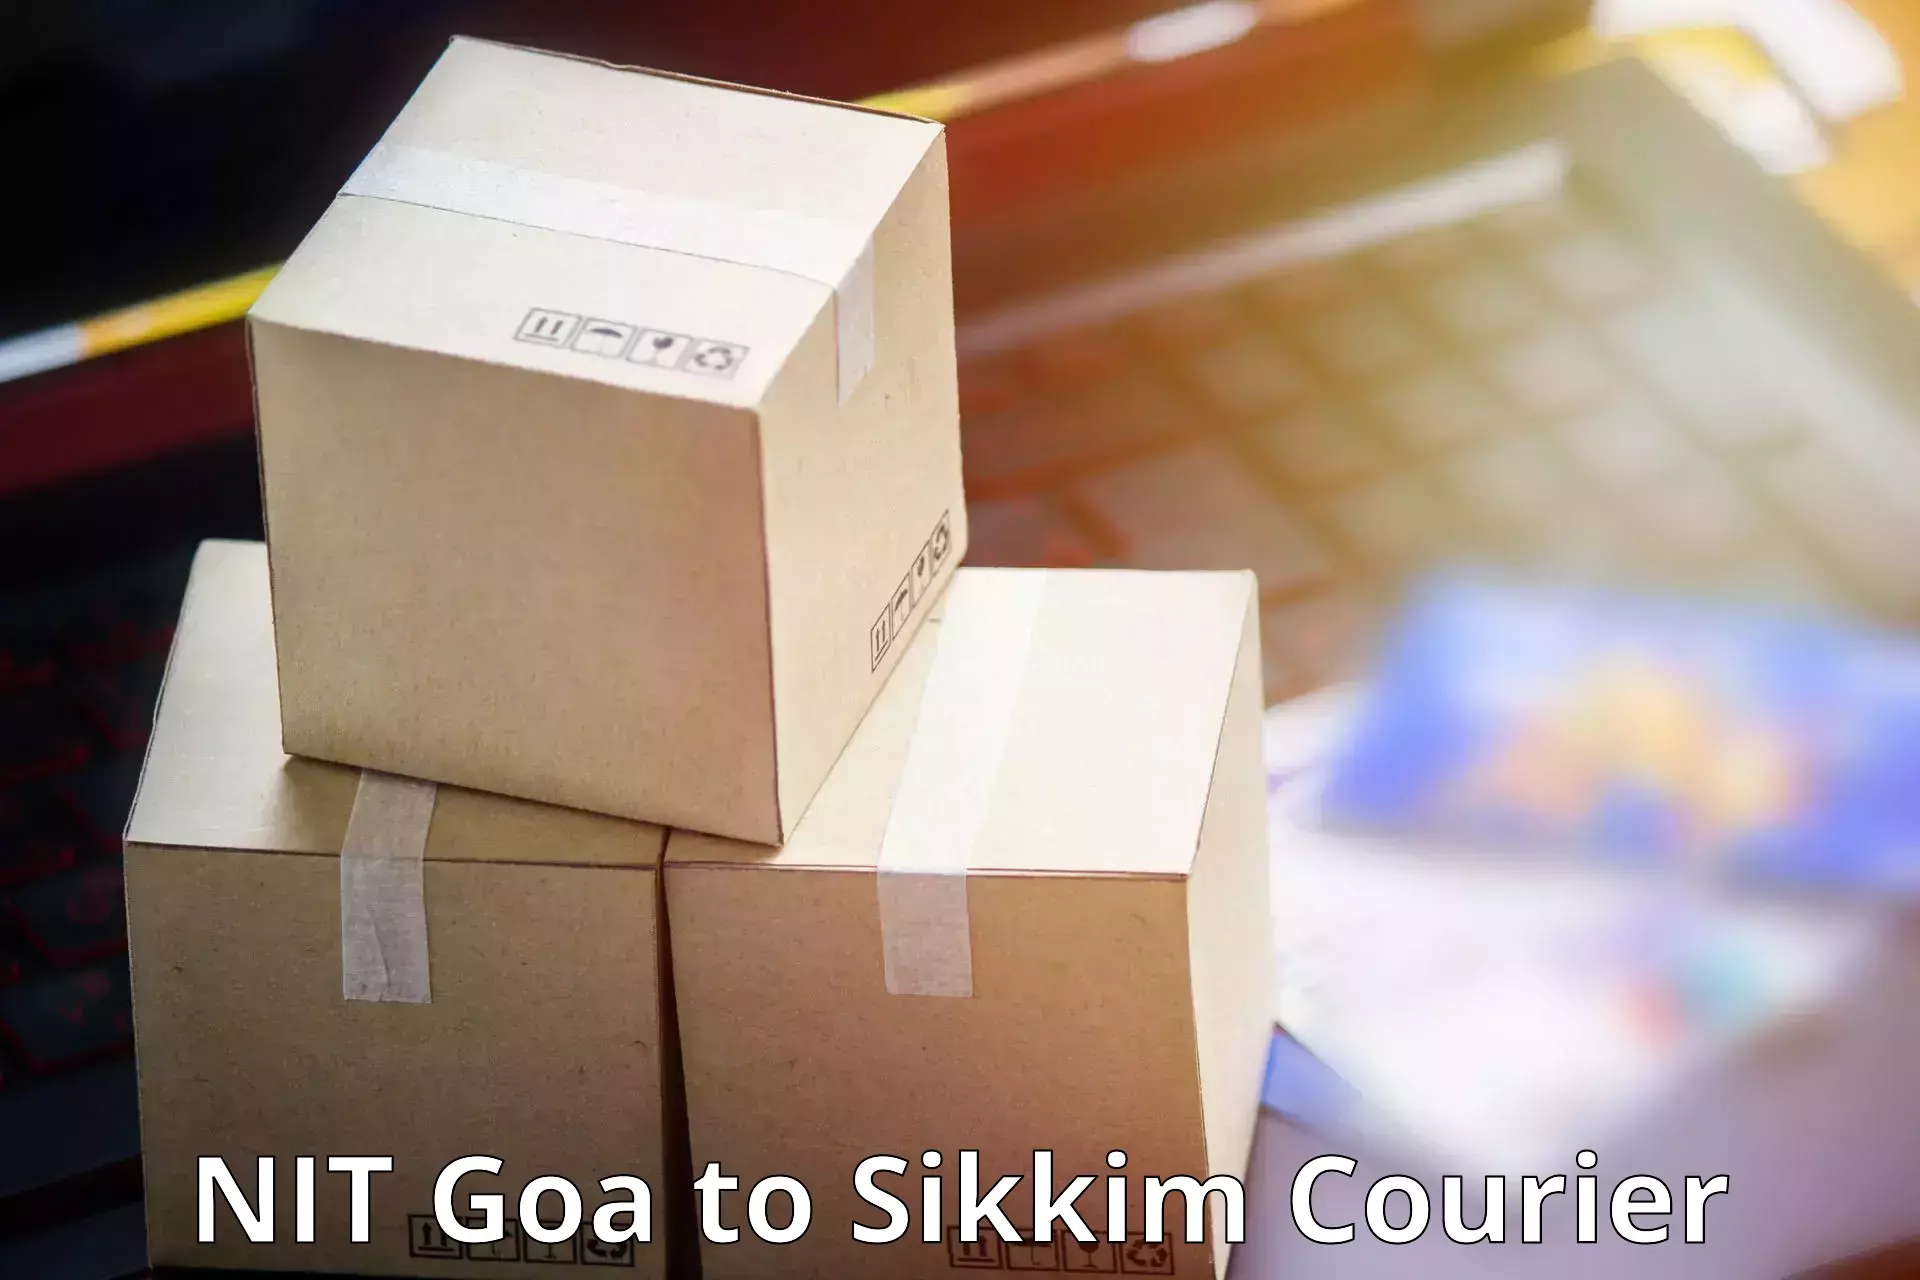 Specialized courier services NIT Goa to Gangtok